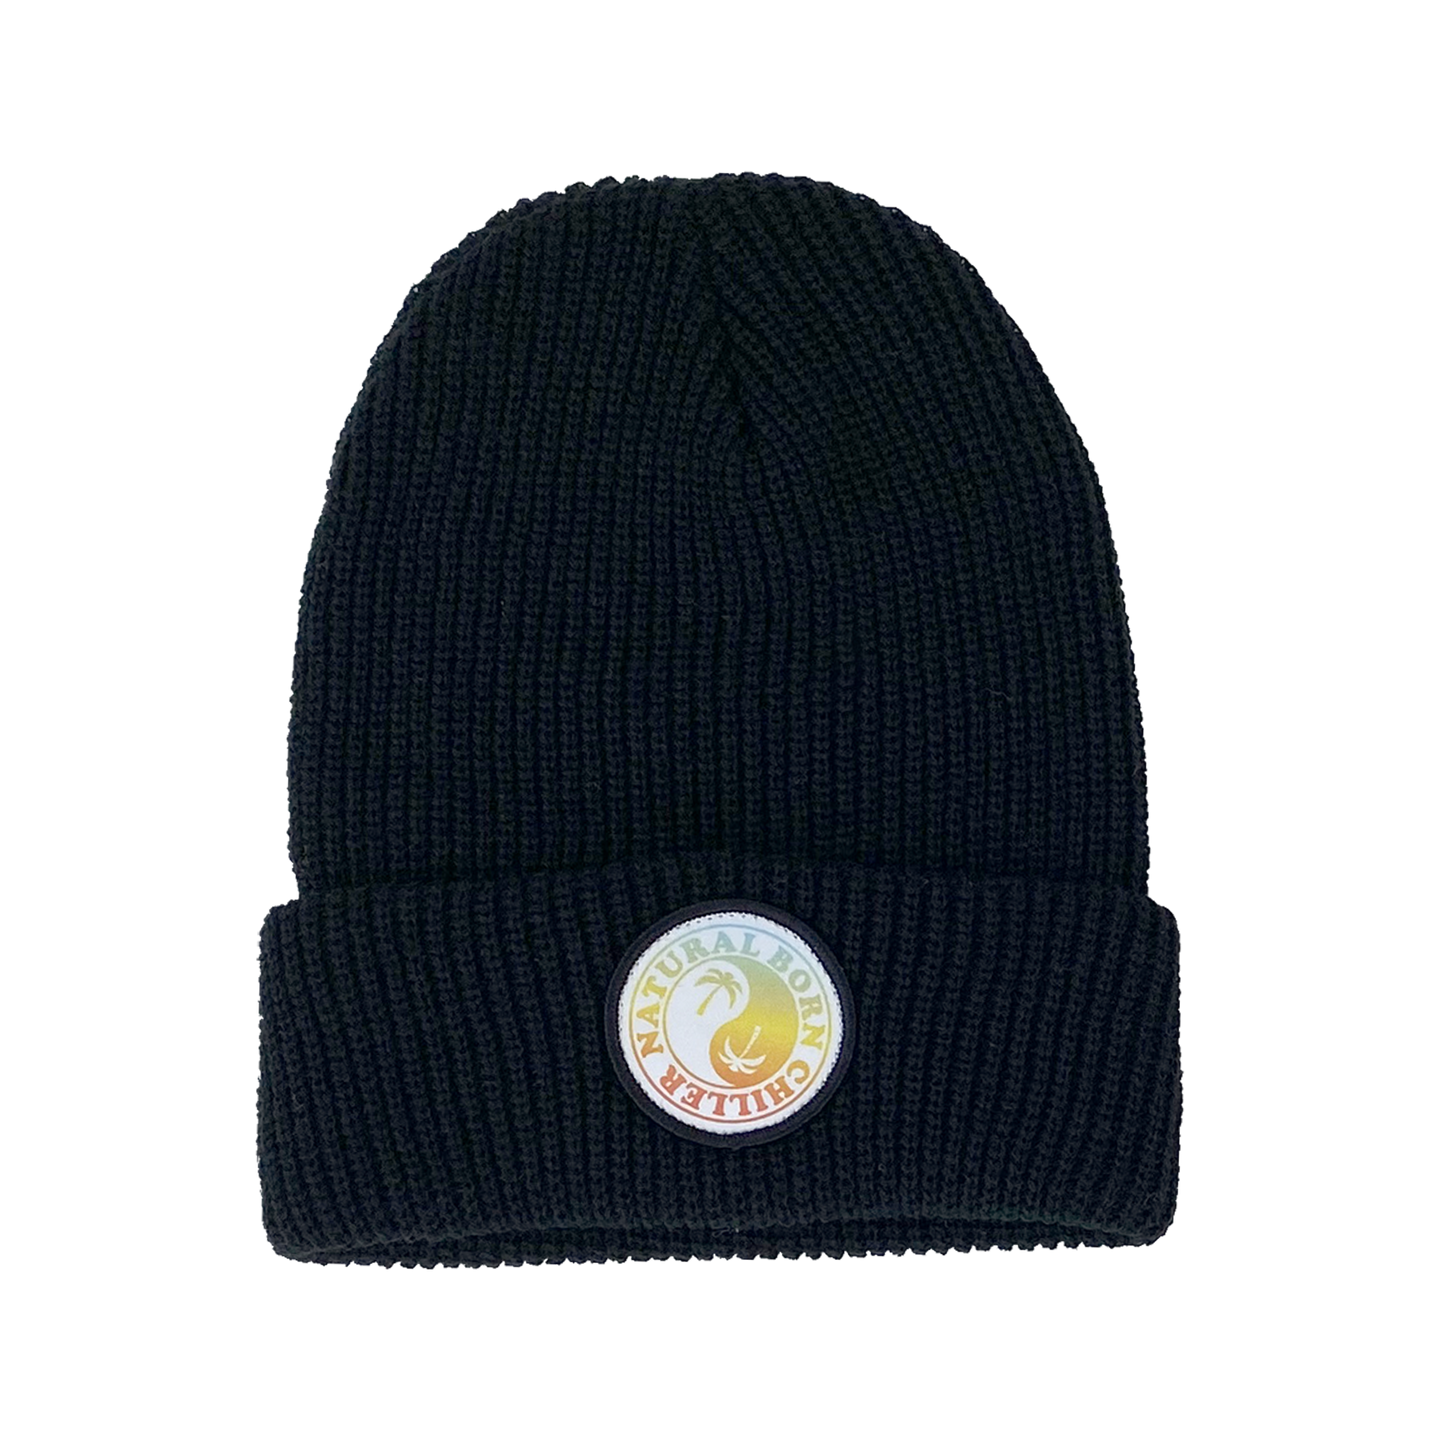 Tiny Whales - Chiller Beanie - Black